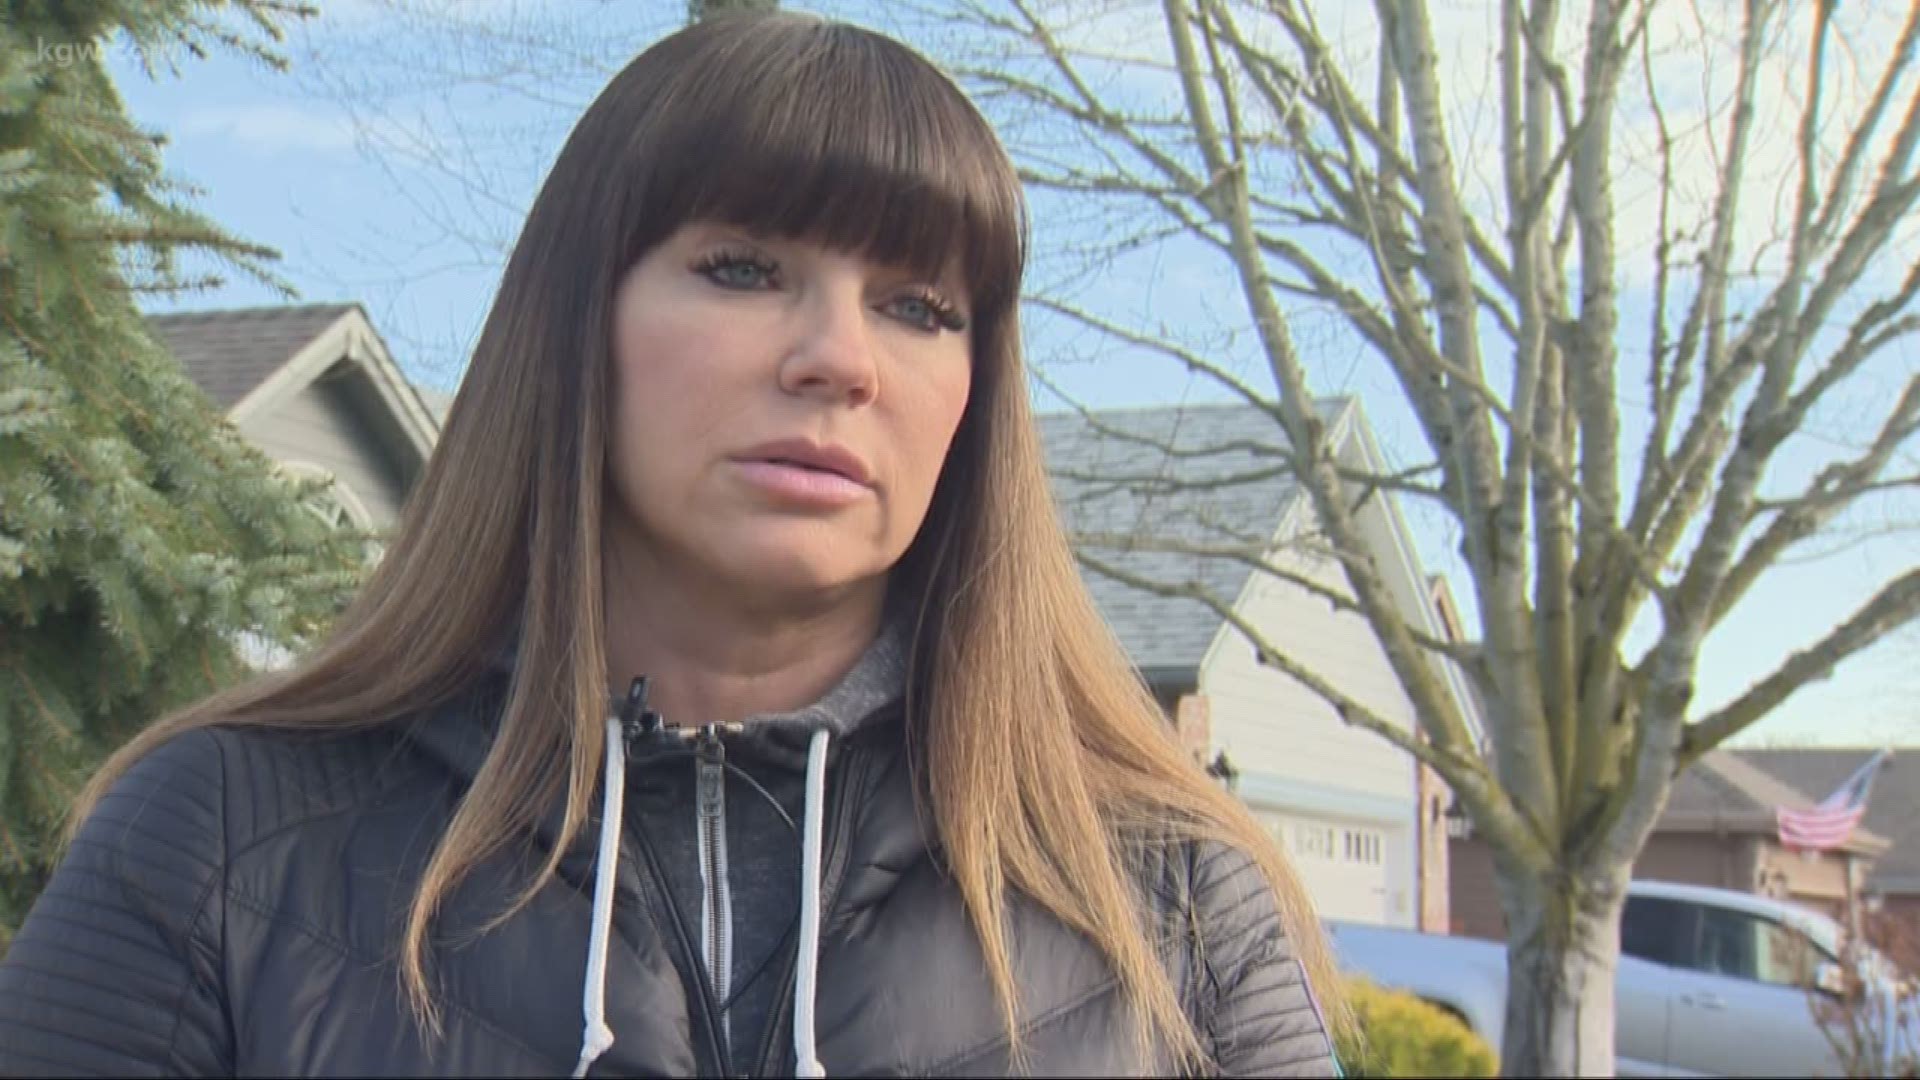 The Portland office of the FBI is investigating after activist and sexual assault survivor Brenda Tracy received a threatening letter with a white powder inside.